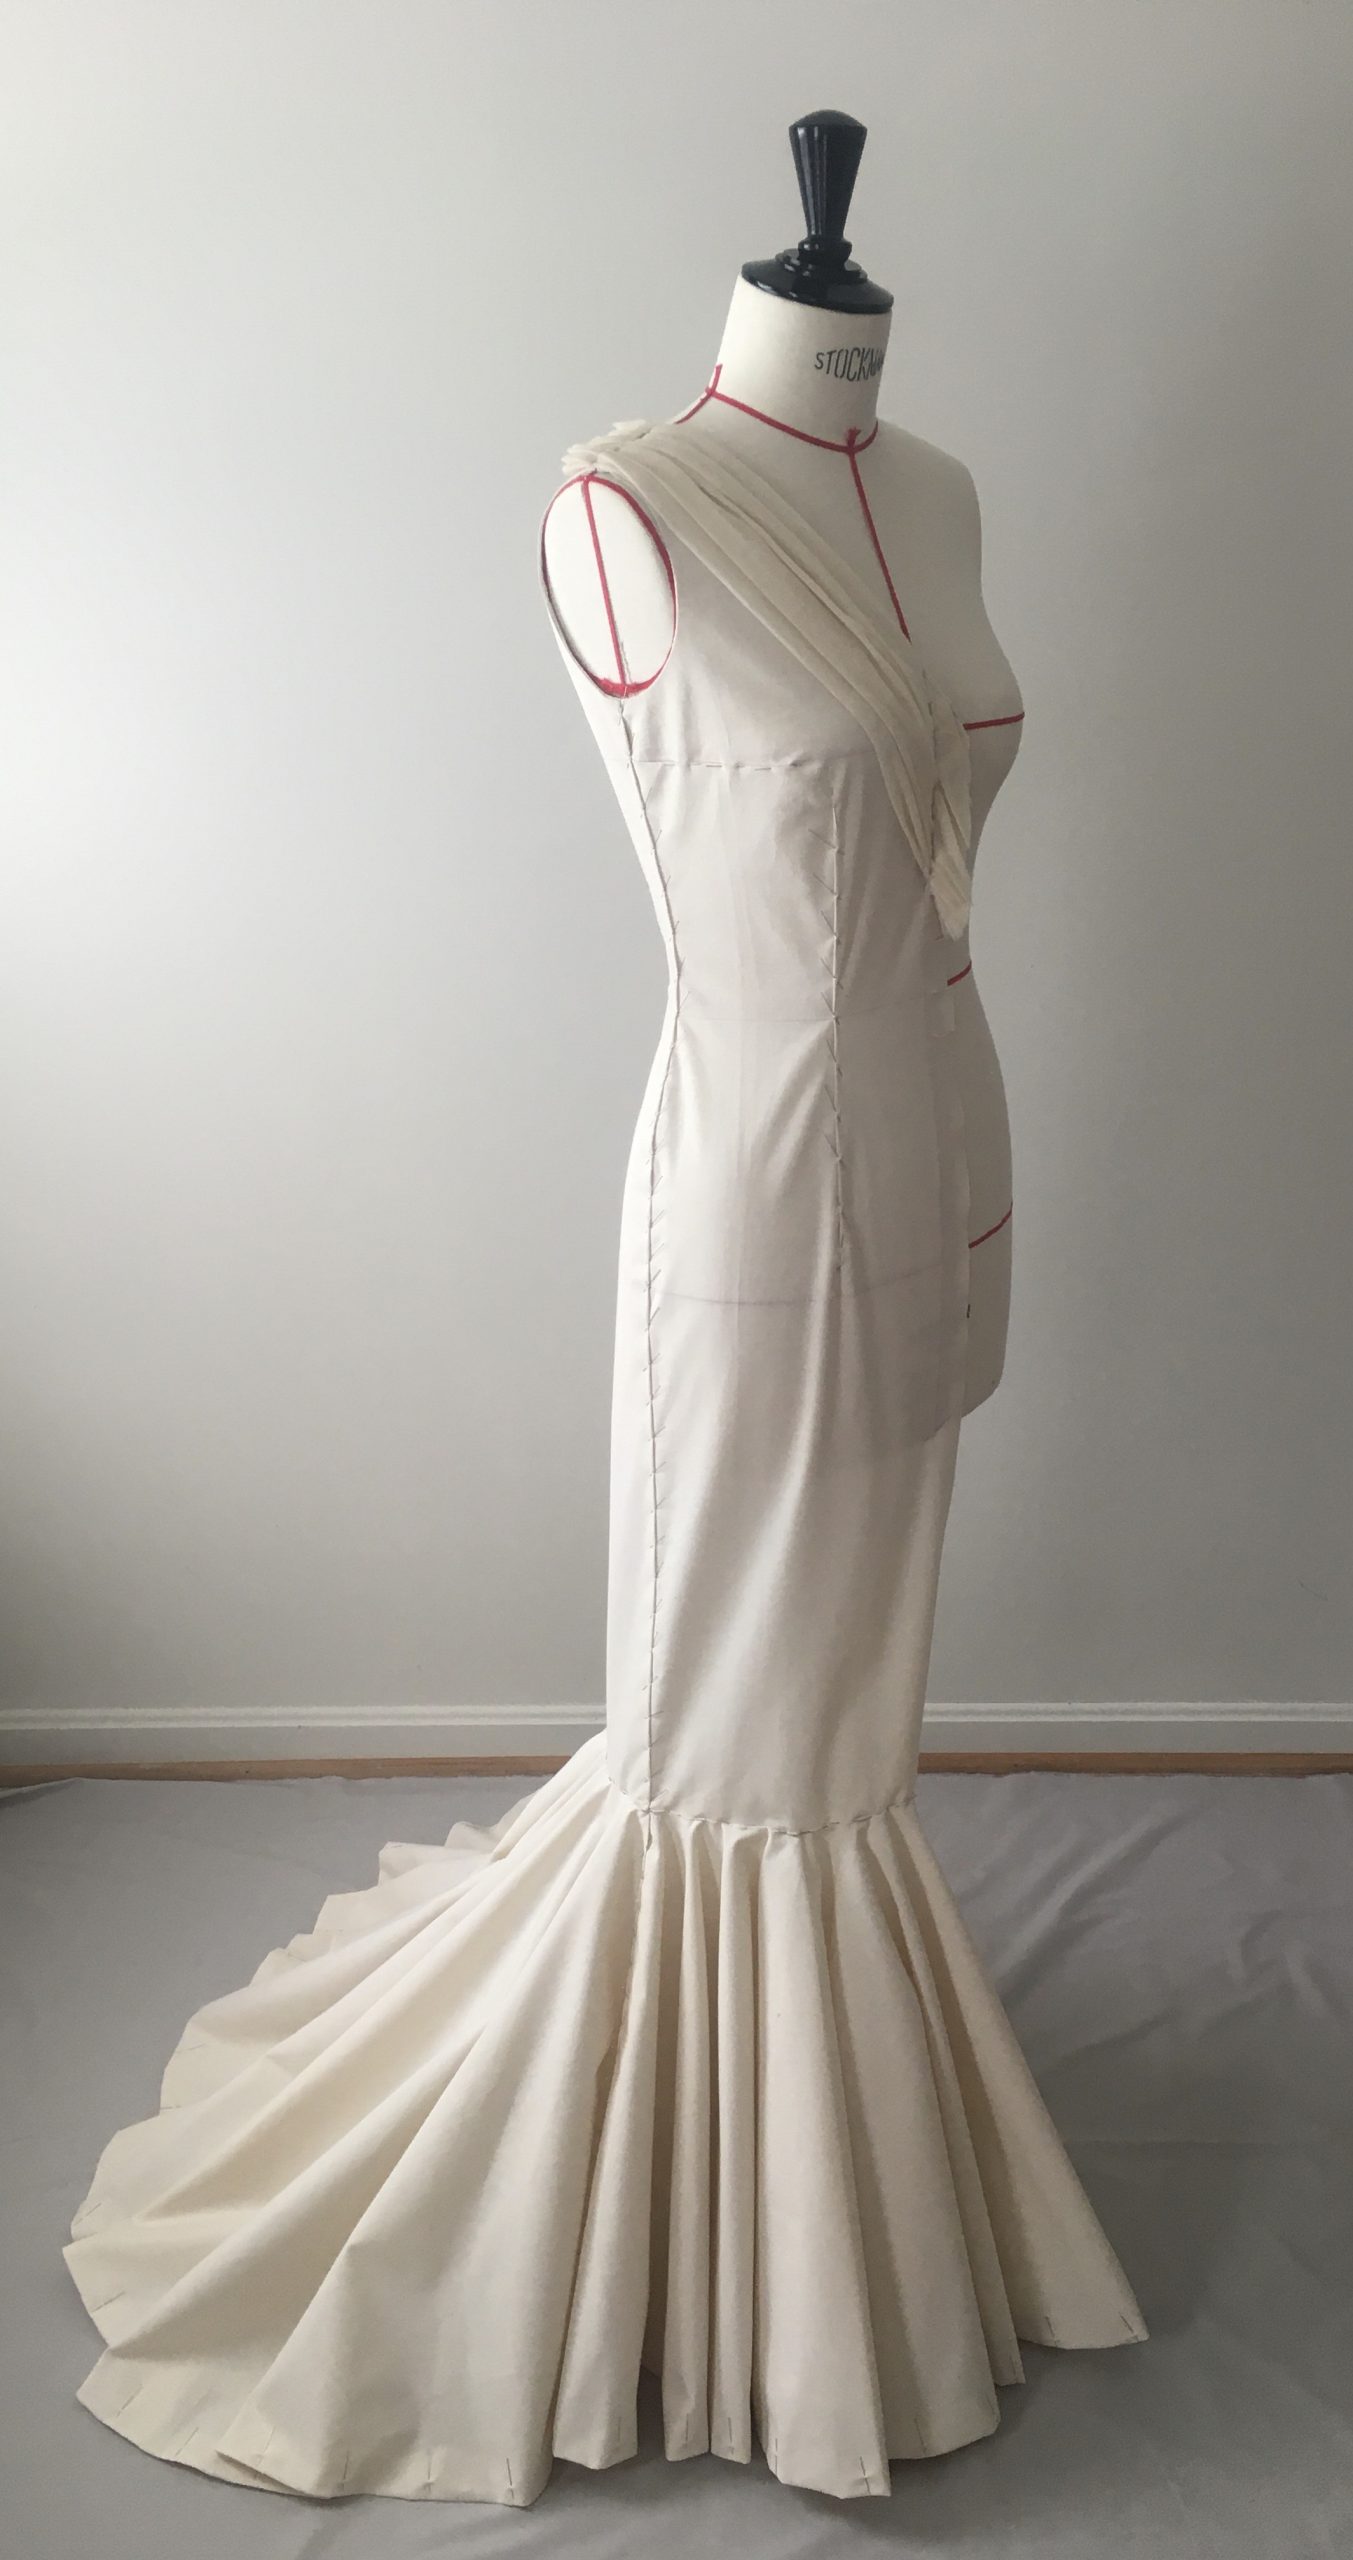 Draping a Custom Dress, Part Four: Prototyping - WeAllSew